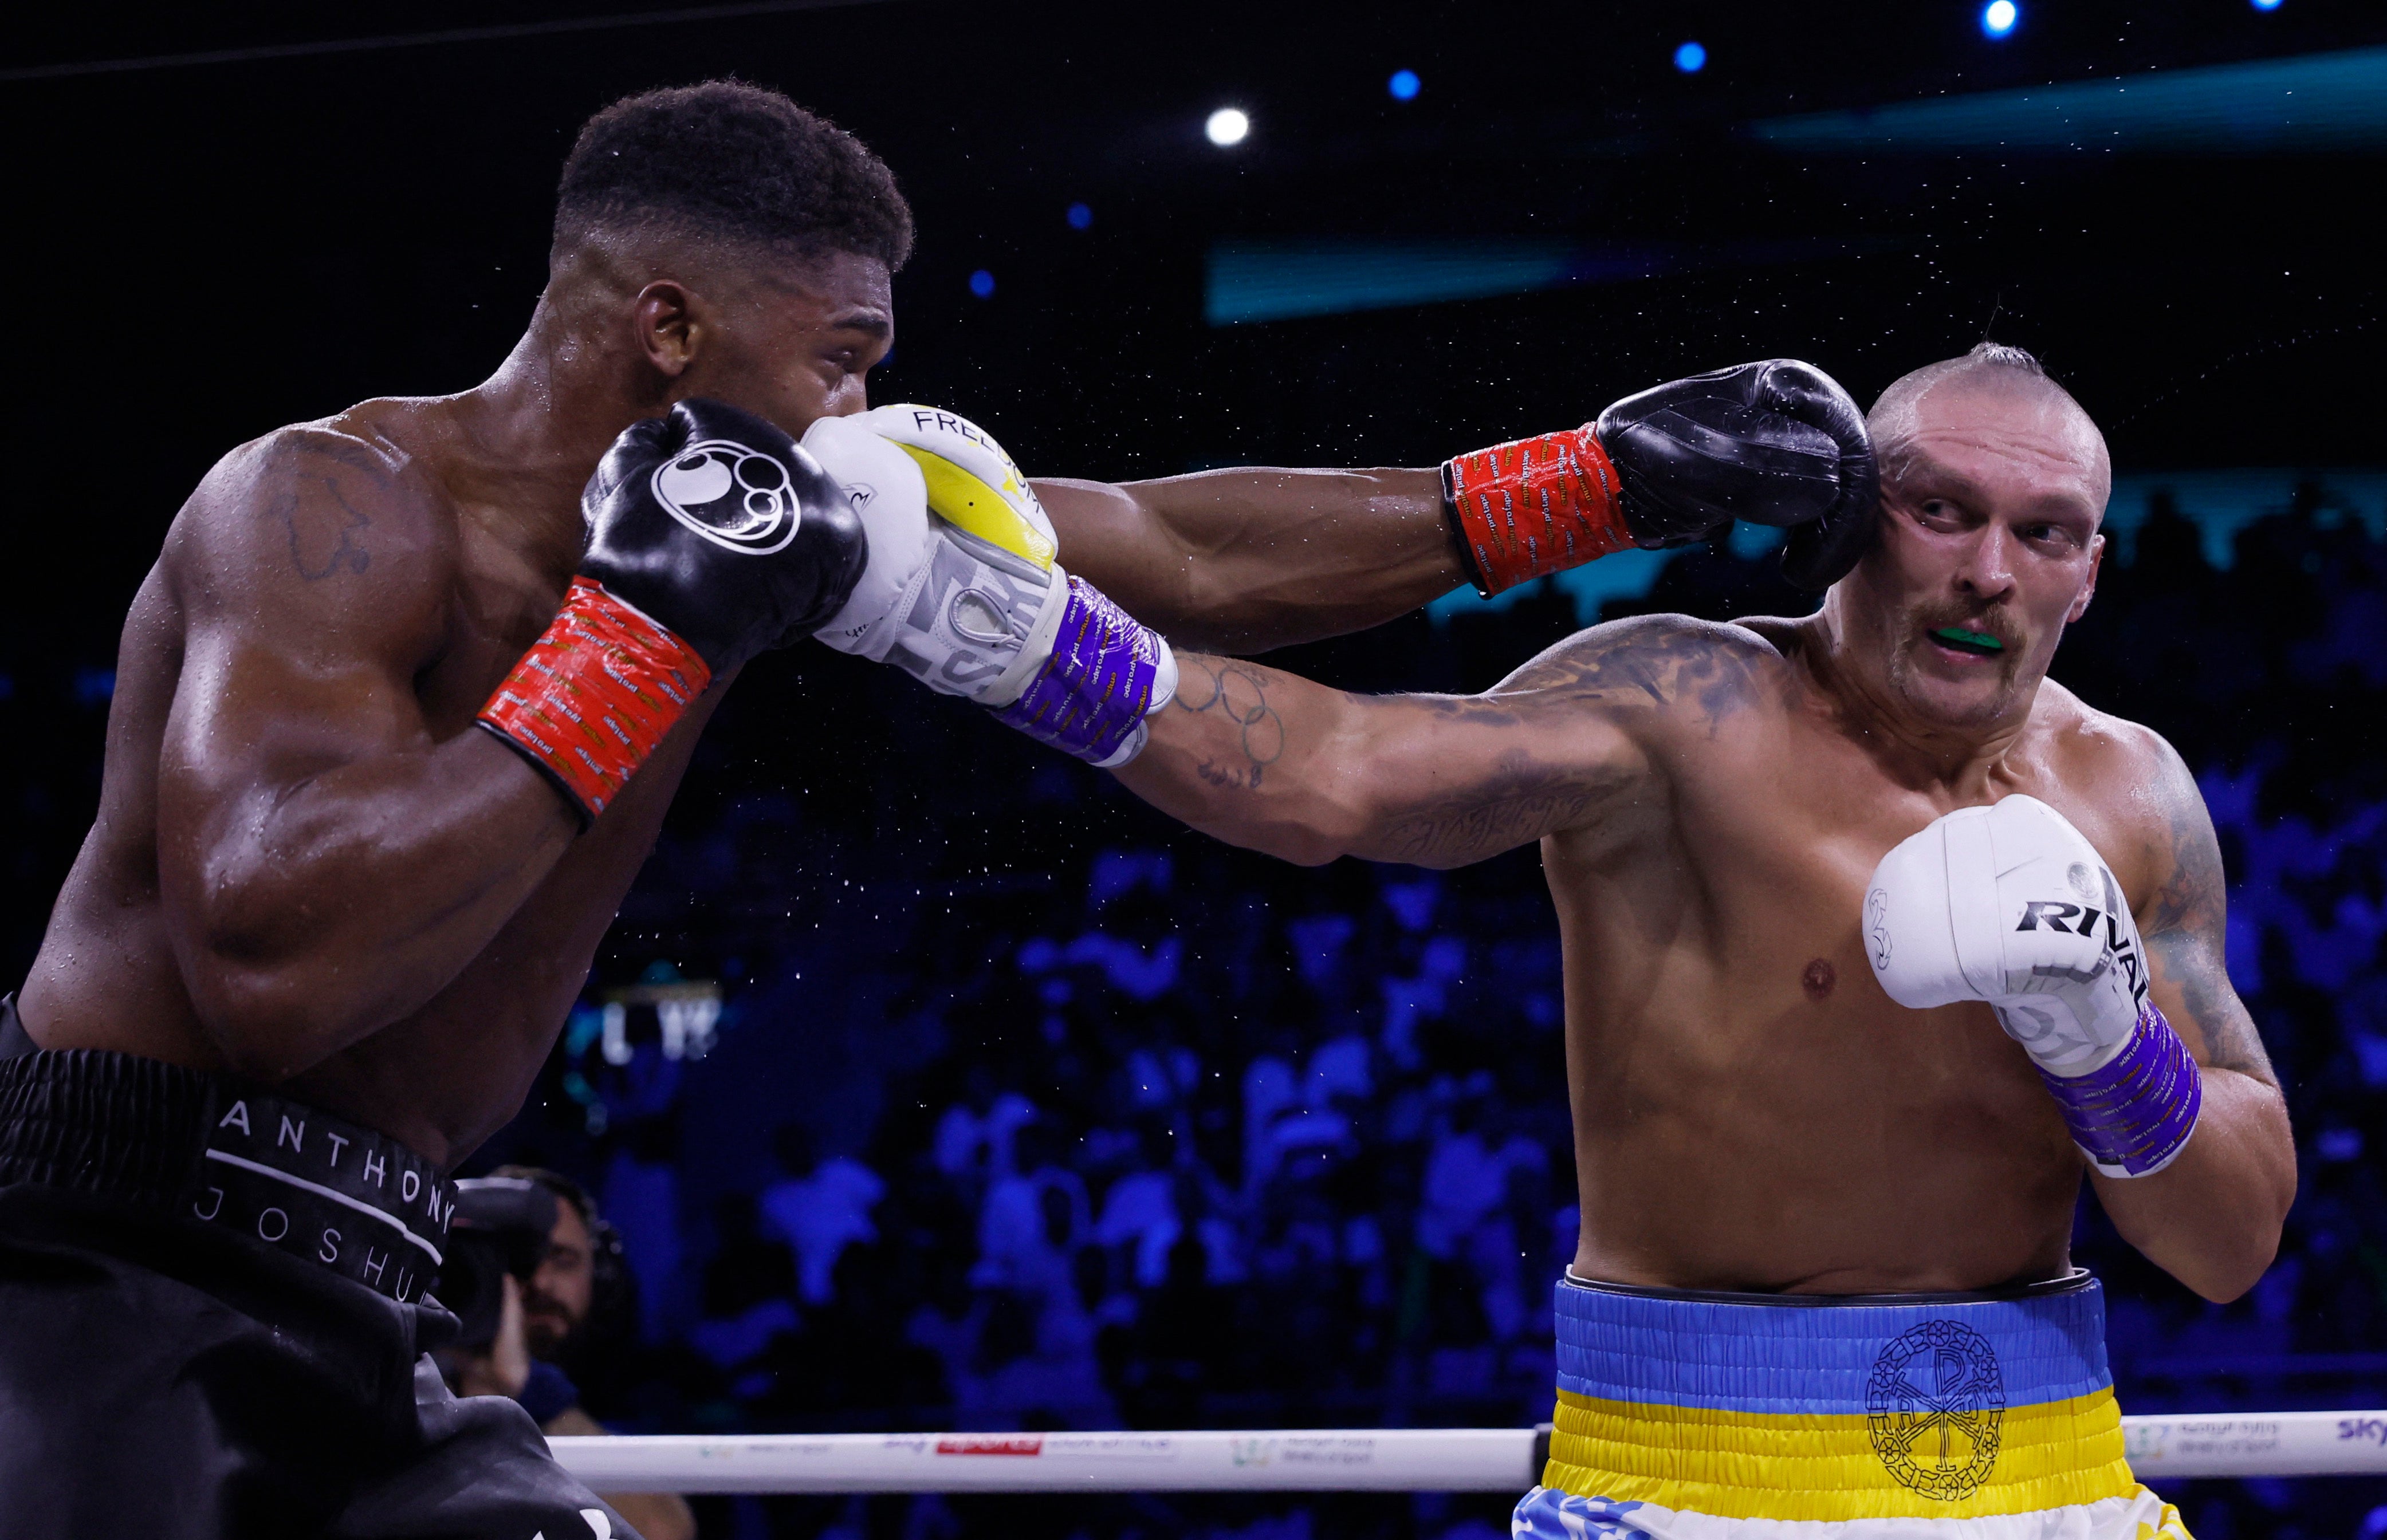 Anthony Joshua vs Oleksandr Usyk 2 Result, scorecard and report from heavyweight world title fight rematch in Saudi Arabia The Independent